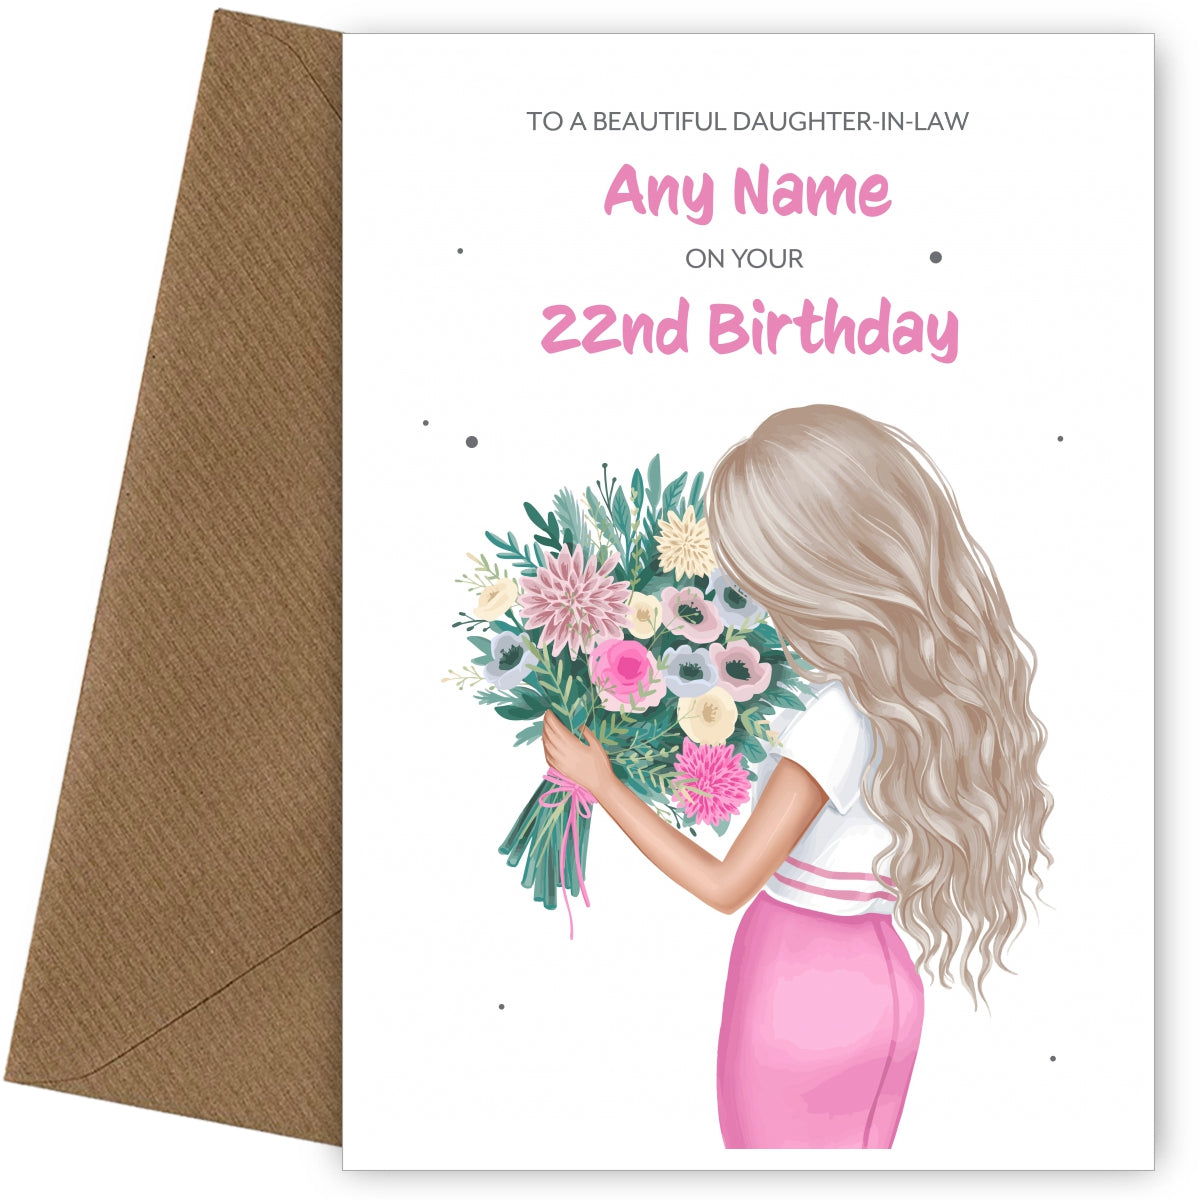 22nd Birthday Card for Daughter-in-law - Beautiful Blonde